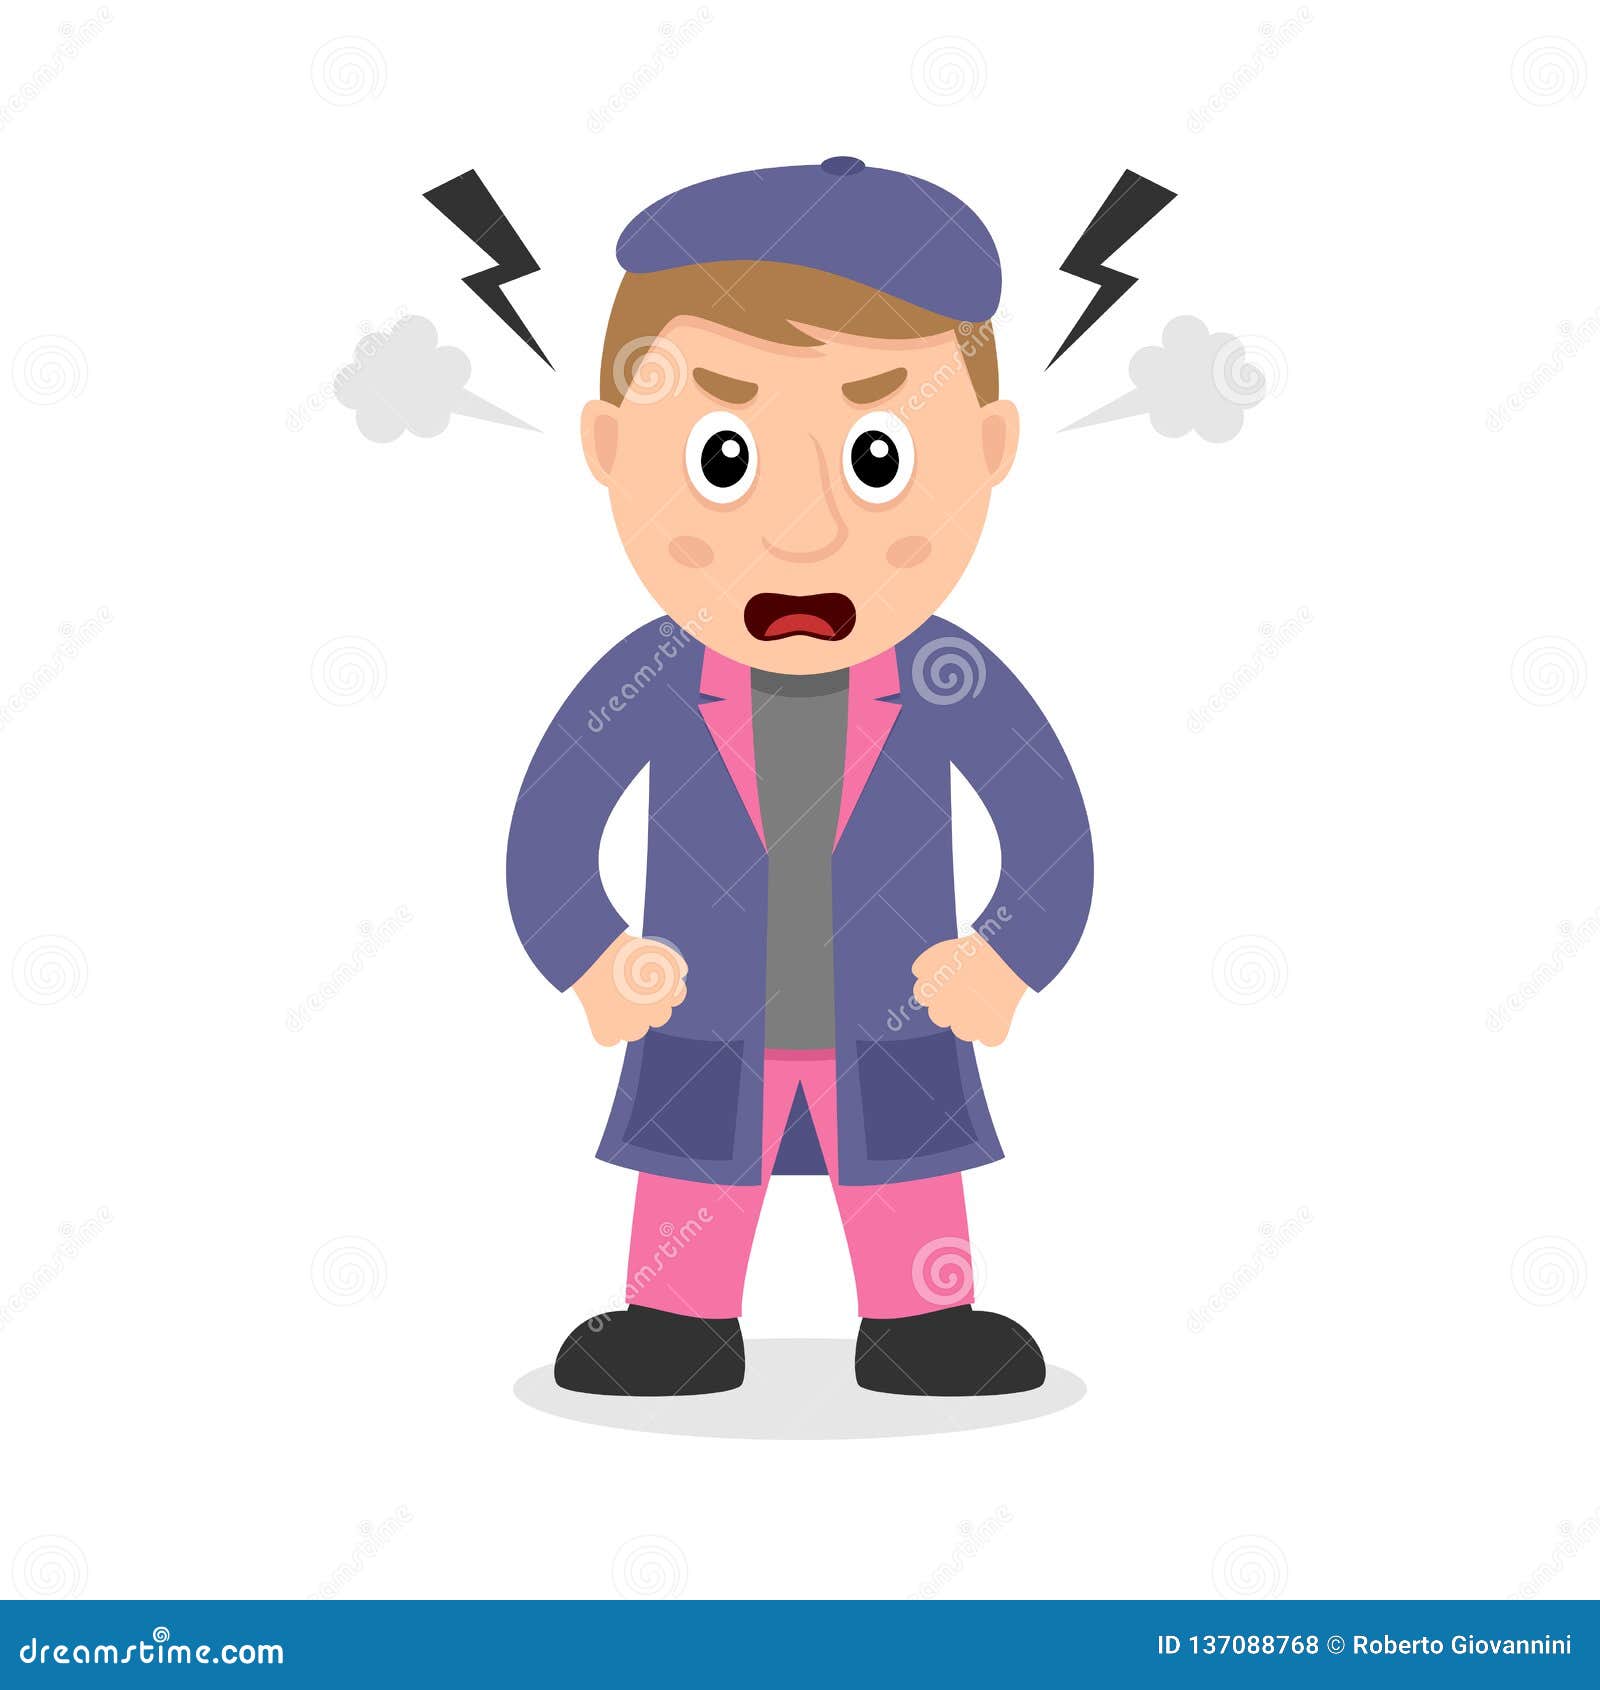 Angry Painter Cartoon Character Stock Vector - Illustration of isolated,  worker: 137088768